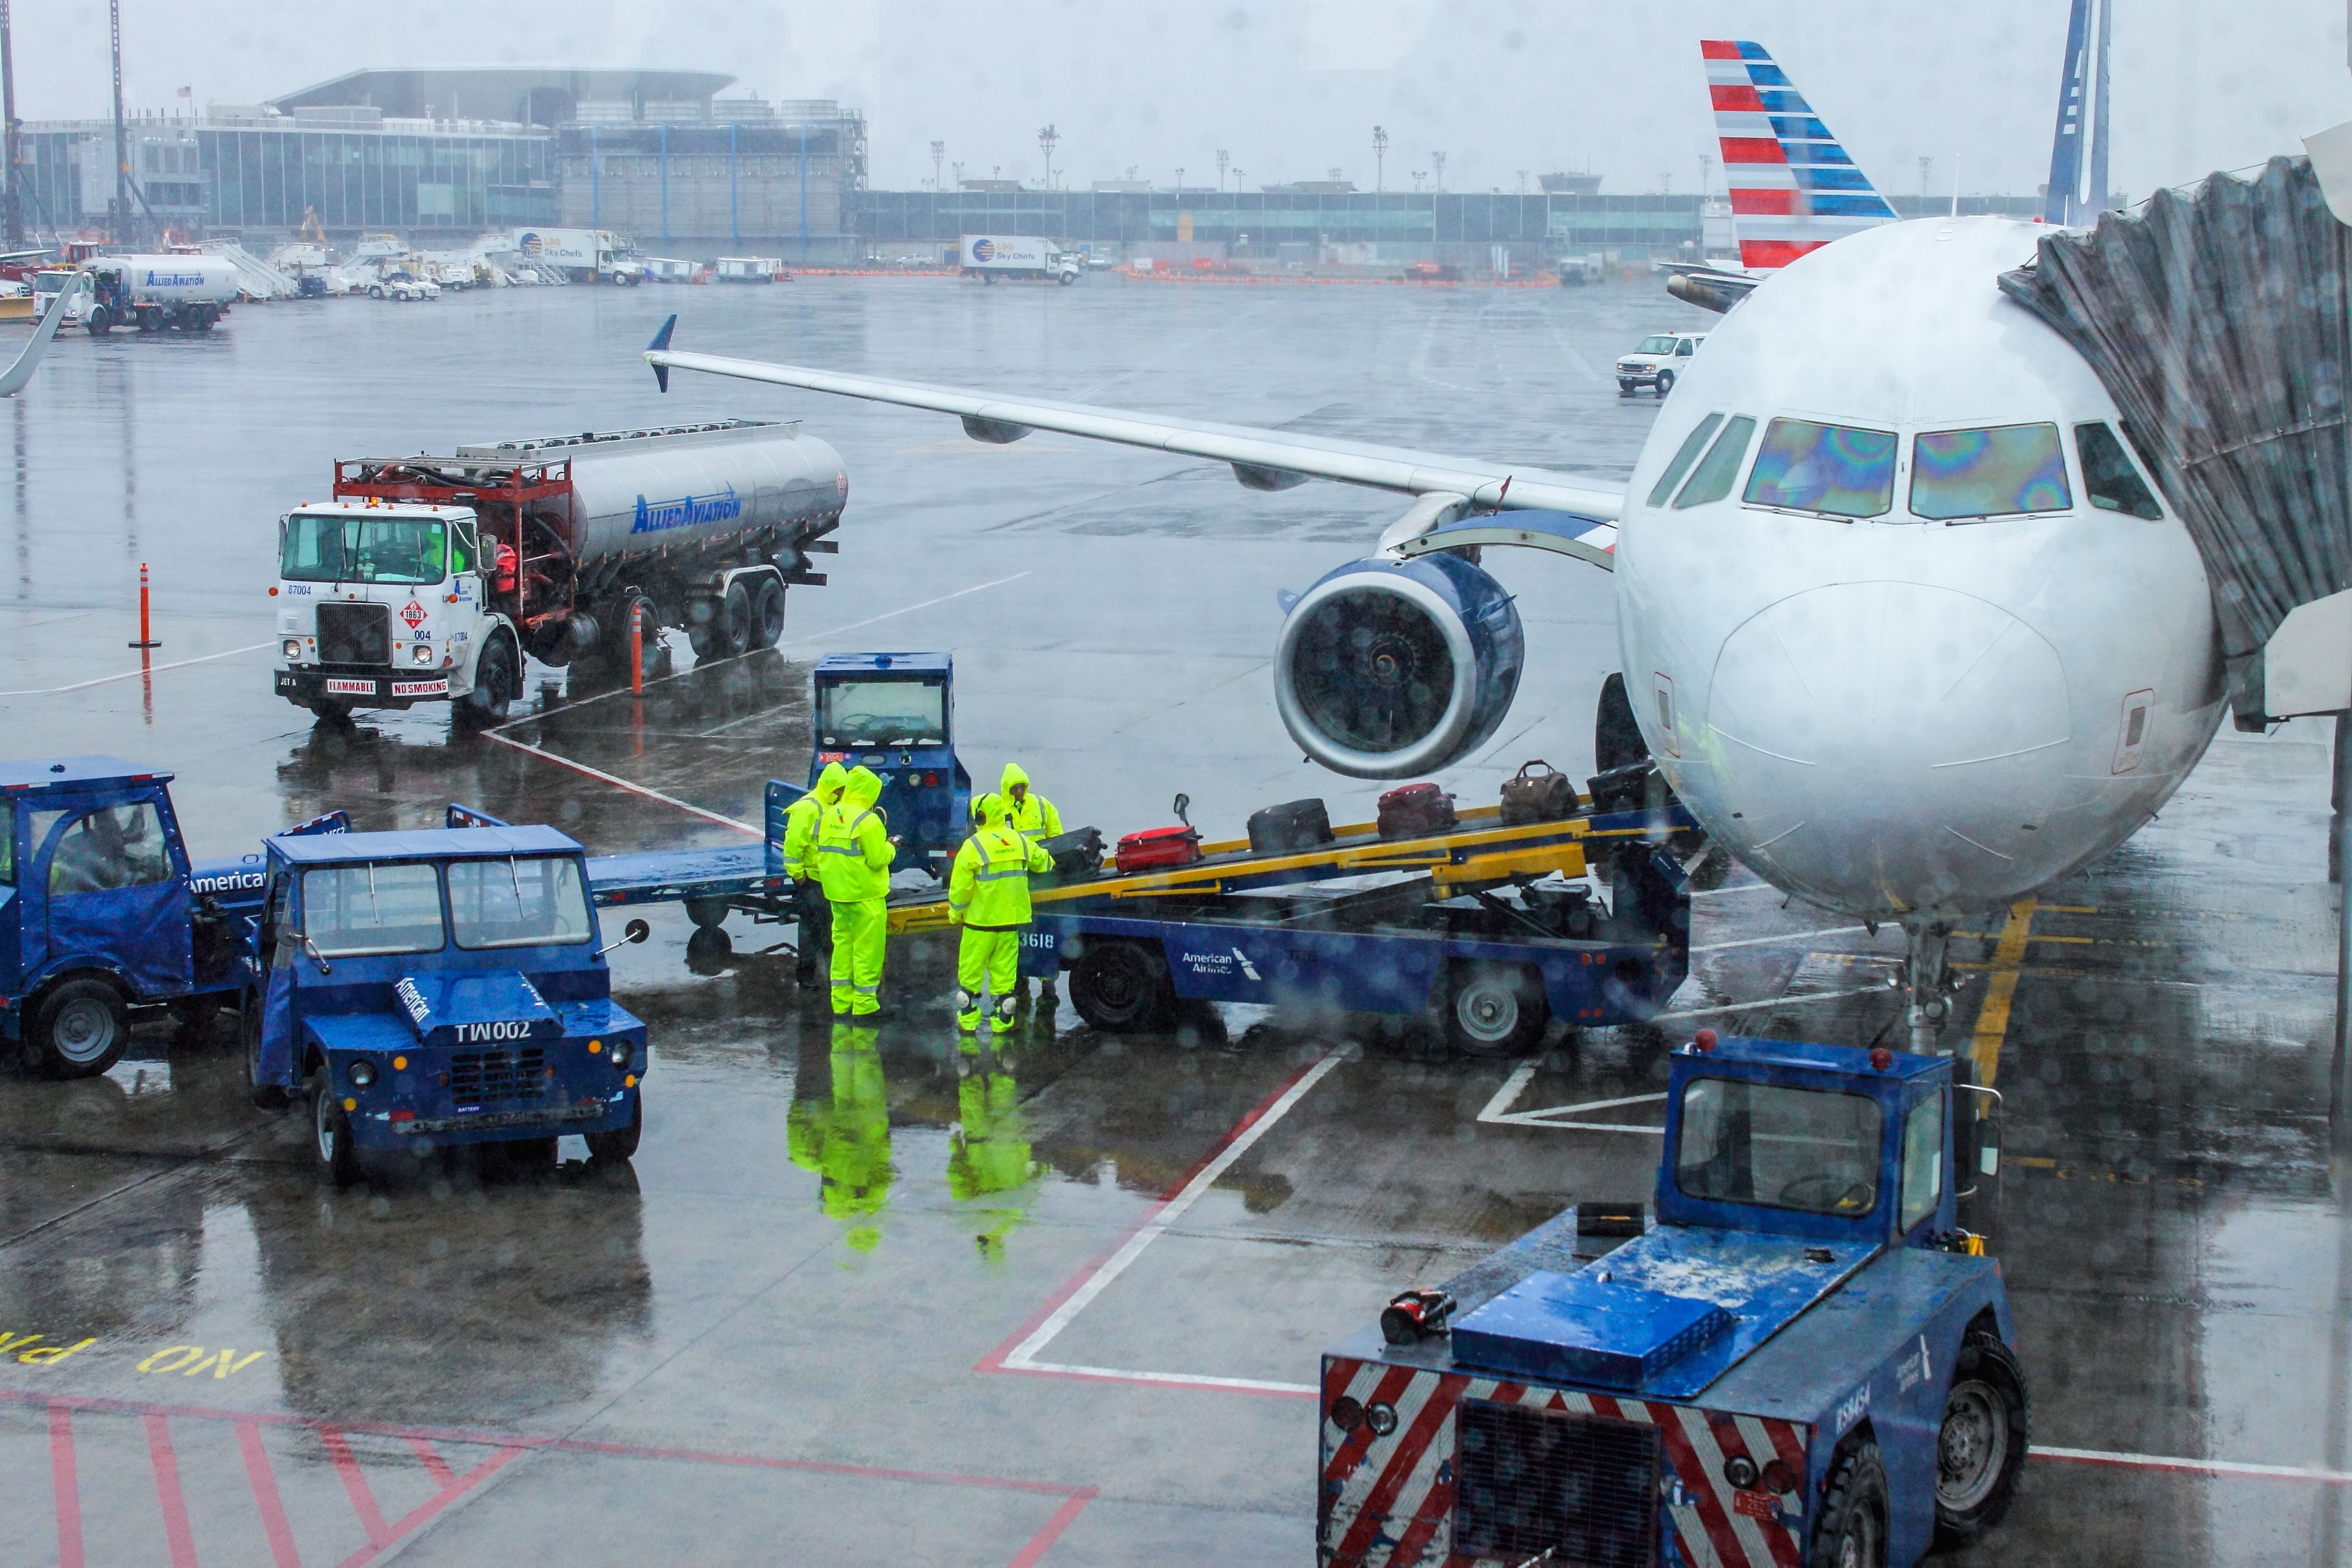 An American Airlines Aircraft being loaded by ground crew on a rainy day at LaGuardia Airport.